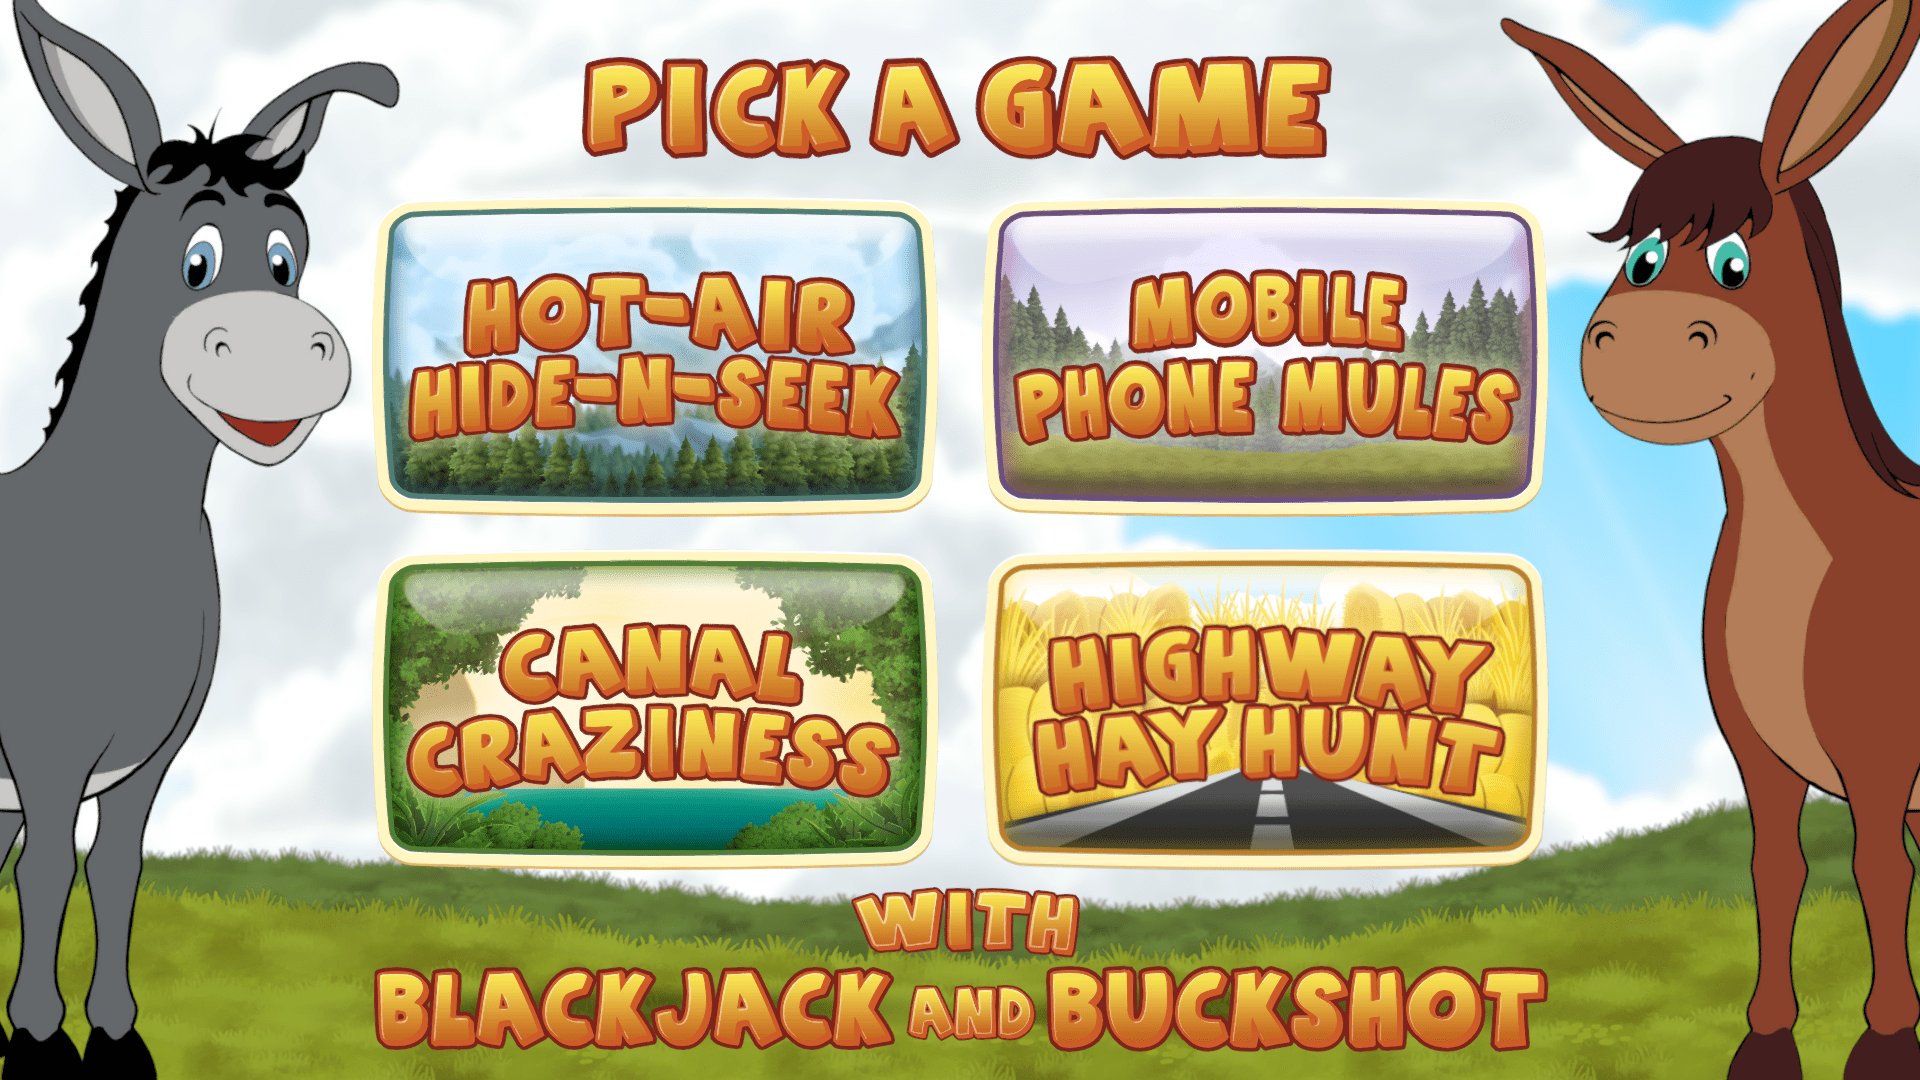 <h3>ATTRACT AND SELECT SCREEN</h3><p>Players choose from four educational modules based on historic Army innovations. Famous Army mascots Blackjack and Buckshot encourage players through voice over and text. Background music and simple animations keep the experience fun.</p>